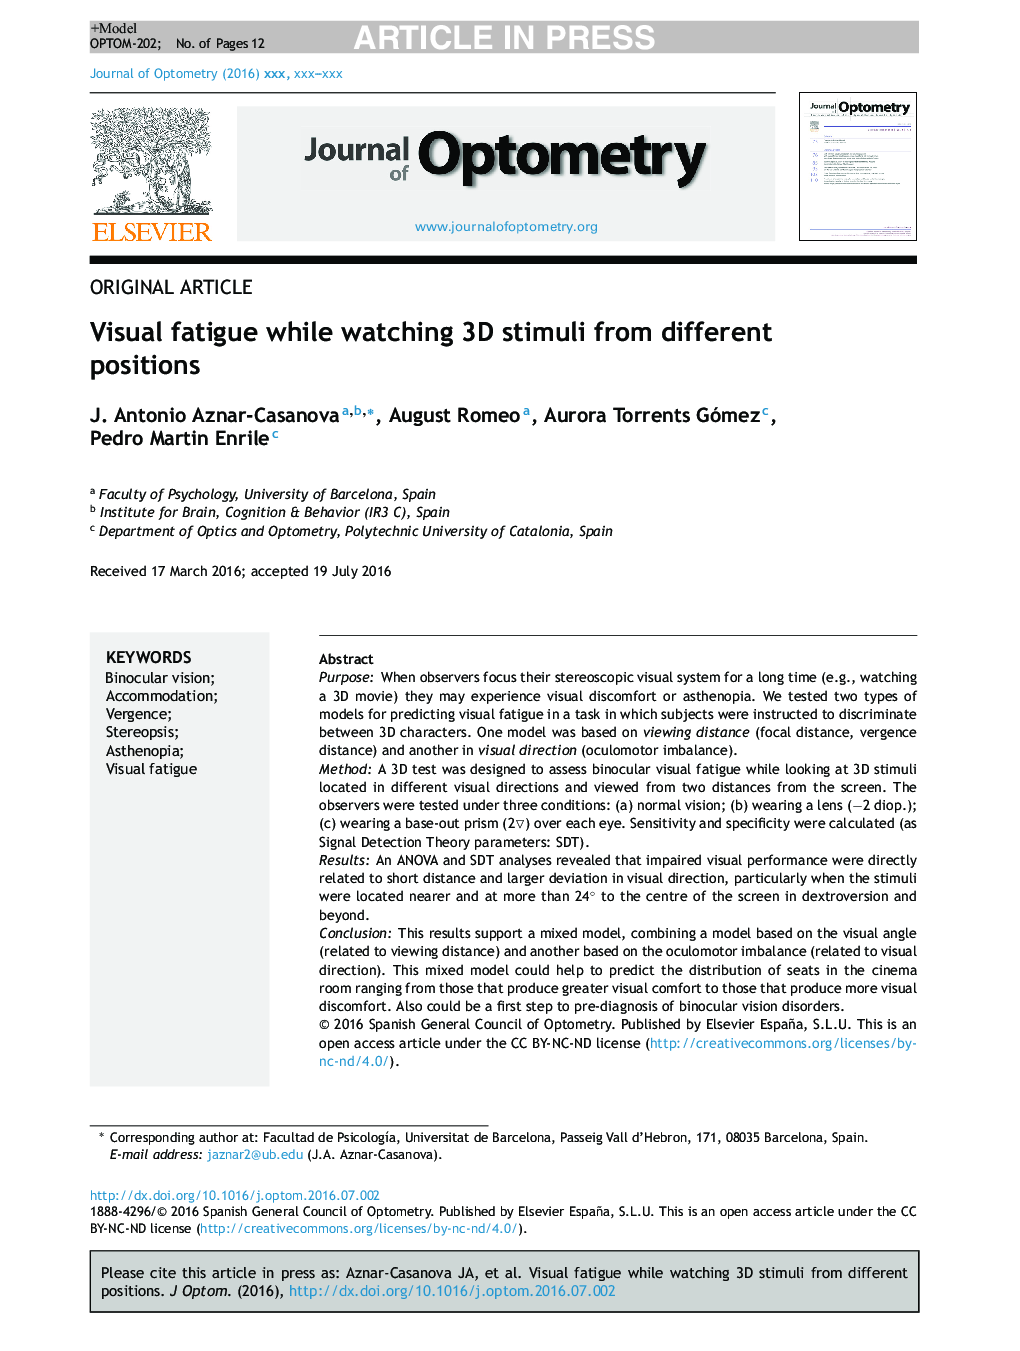 Visual fatigue while watching 3D stimuli from different positions